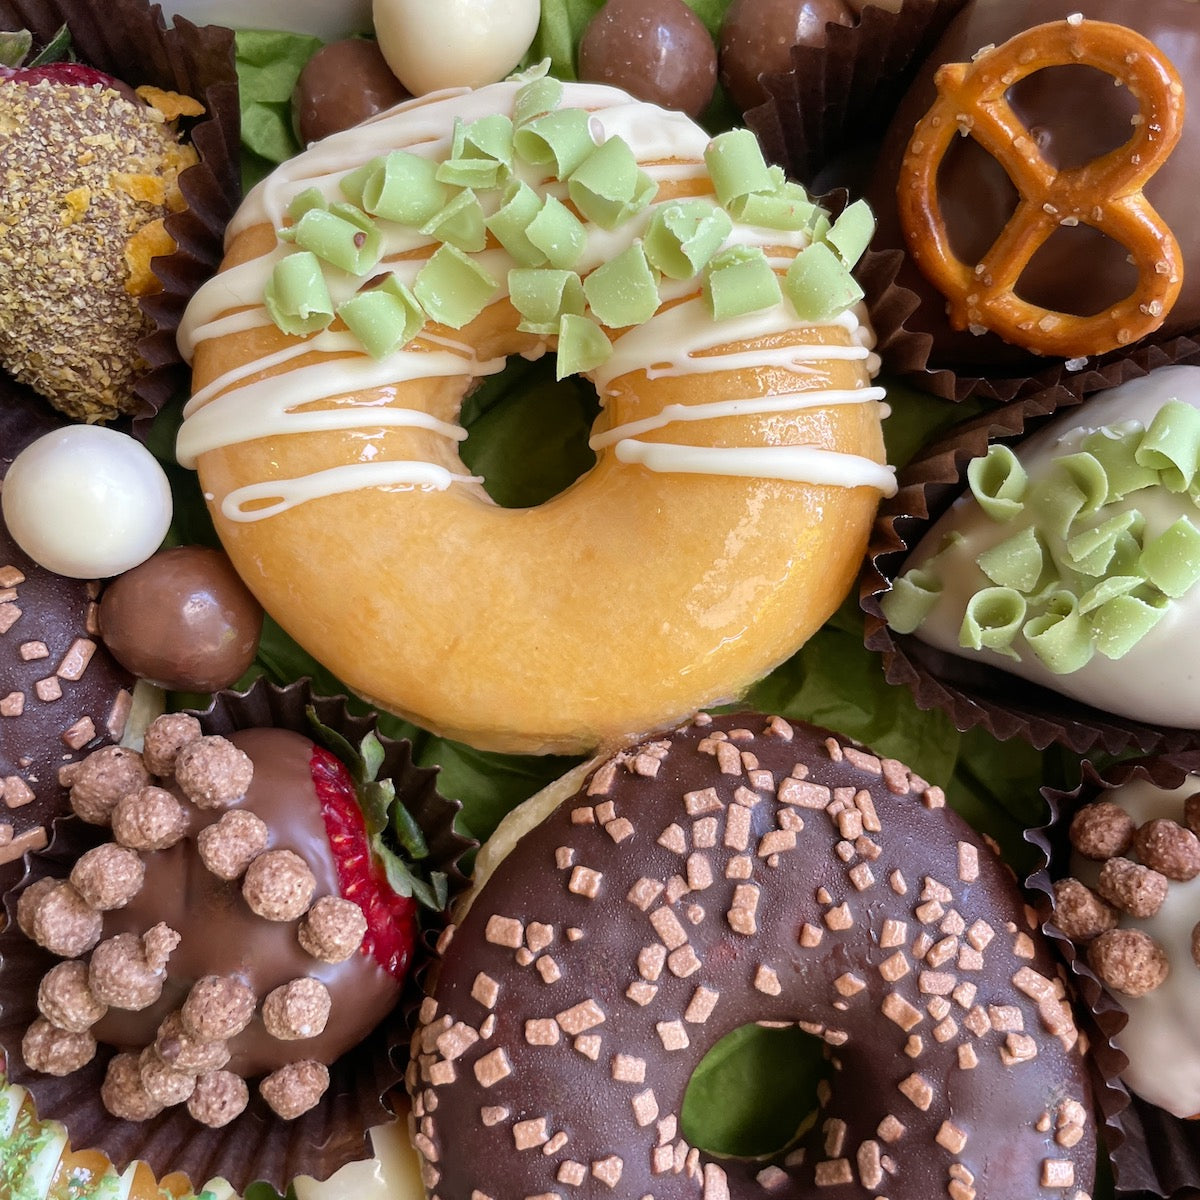 Gourmet donuts & chocolate strawberries - a delectable gift for all occasions.